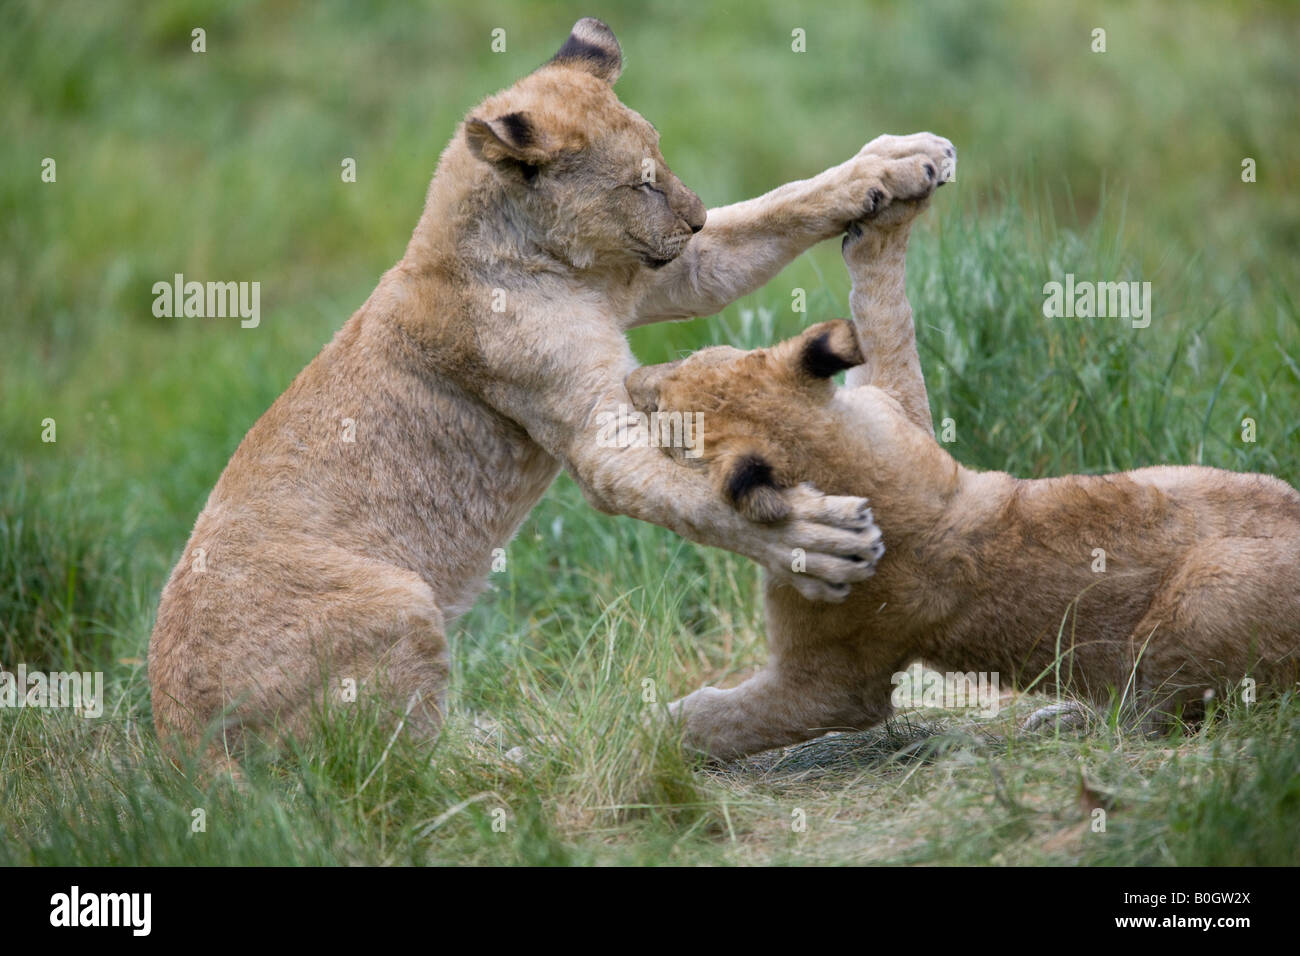 two young Lions fighting playfully - Panthera leo Stock Photo